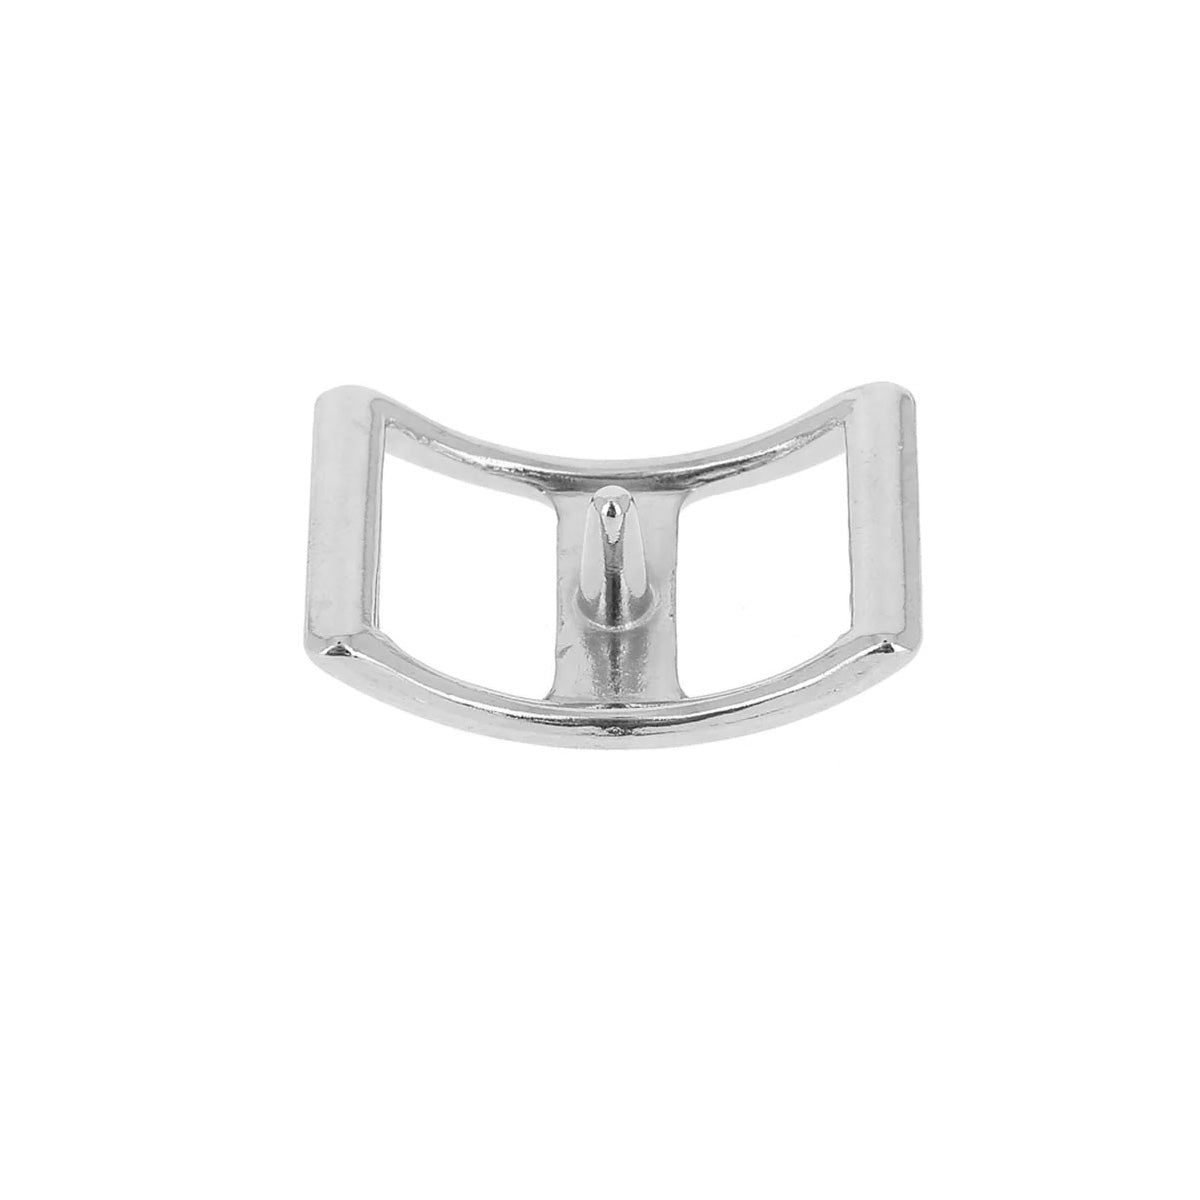 Conway buckle 13 - 25 mm, Stainless Steel